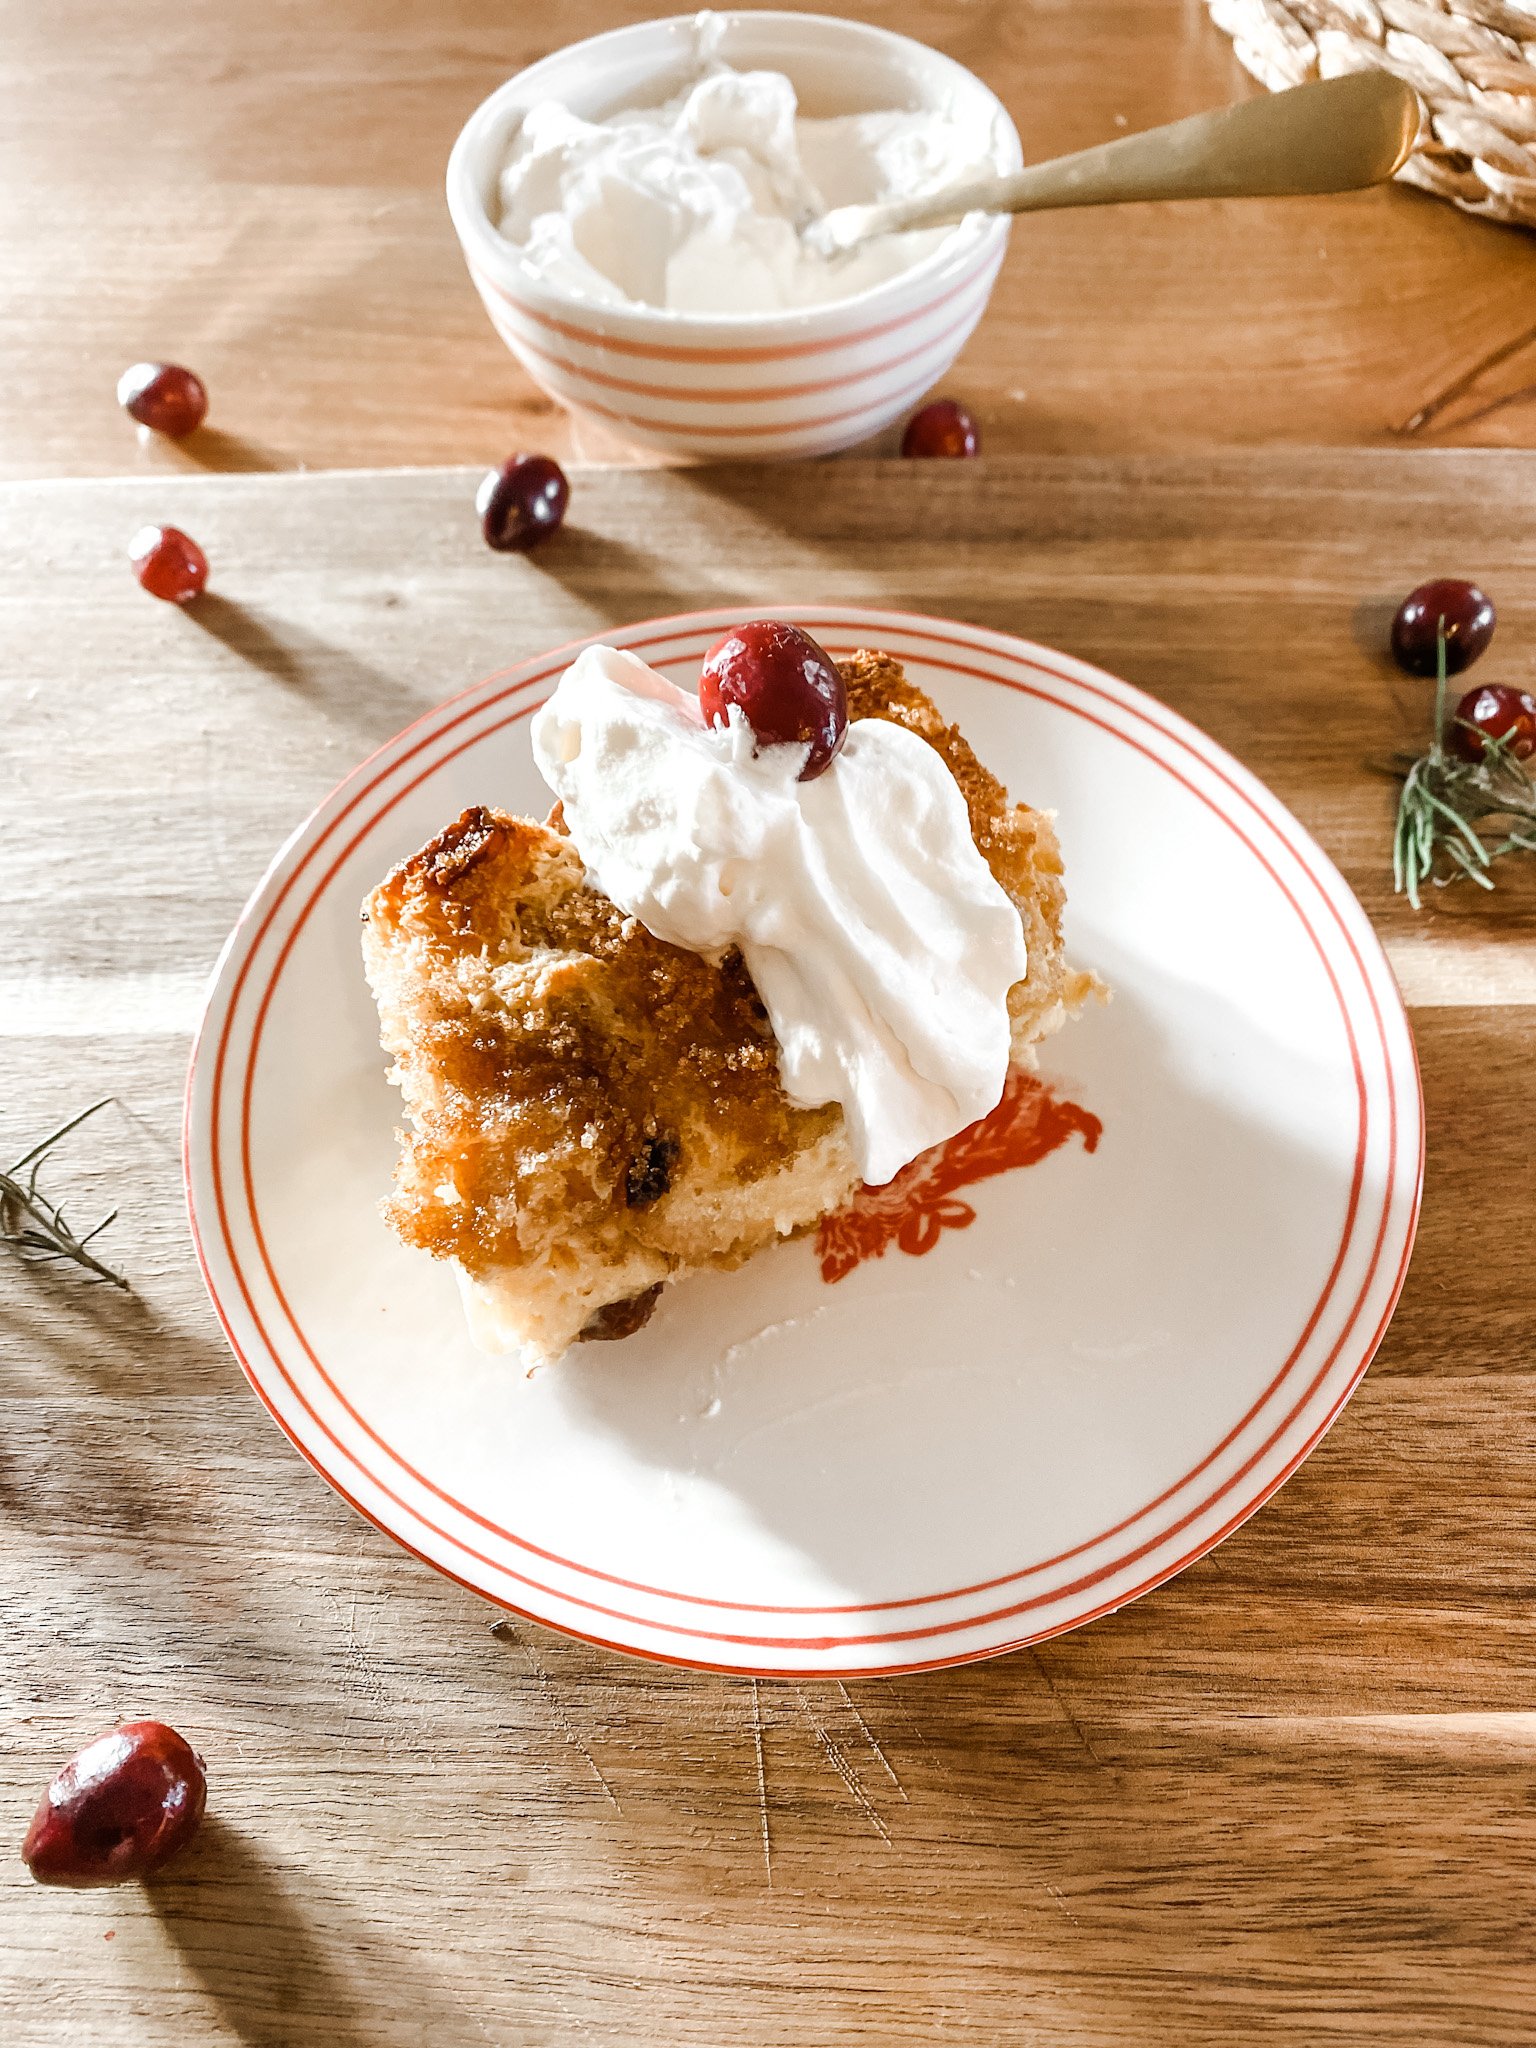 Baked French Toast slice with whipped cream and cranberries on a red and white plate